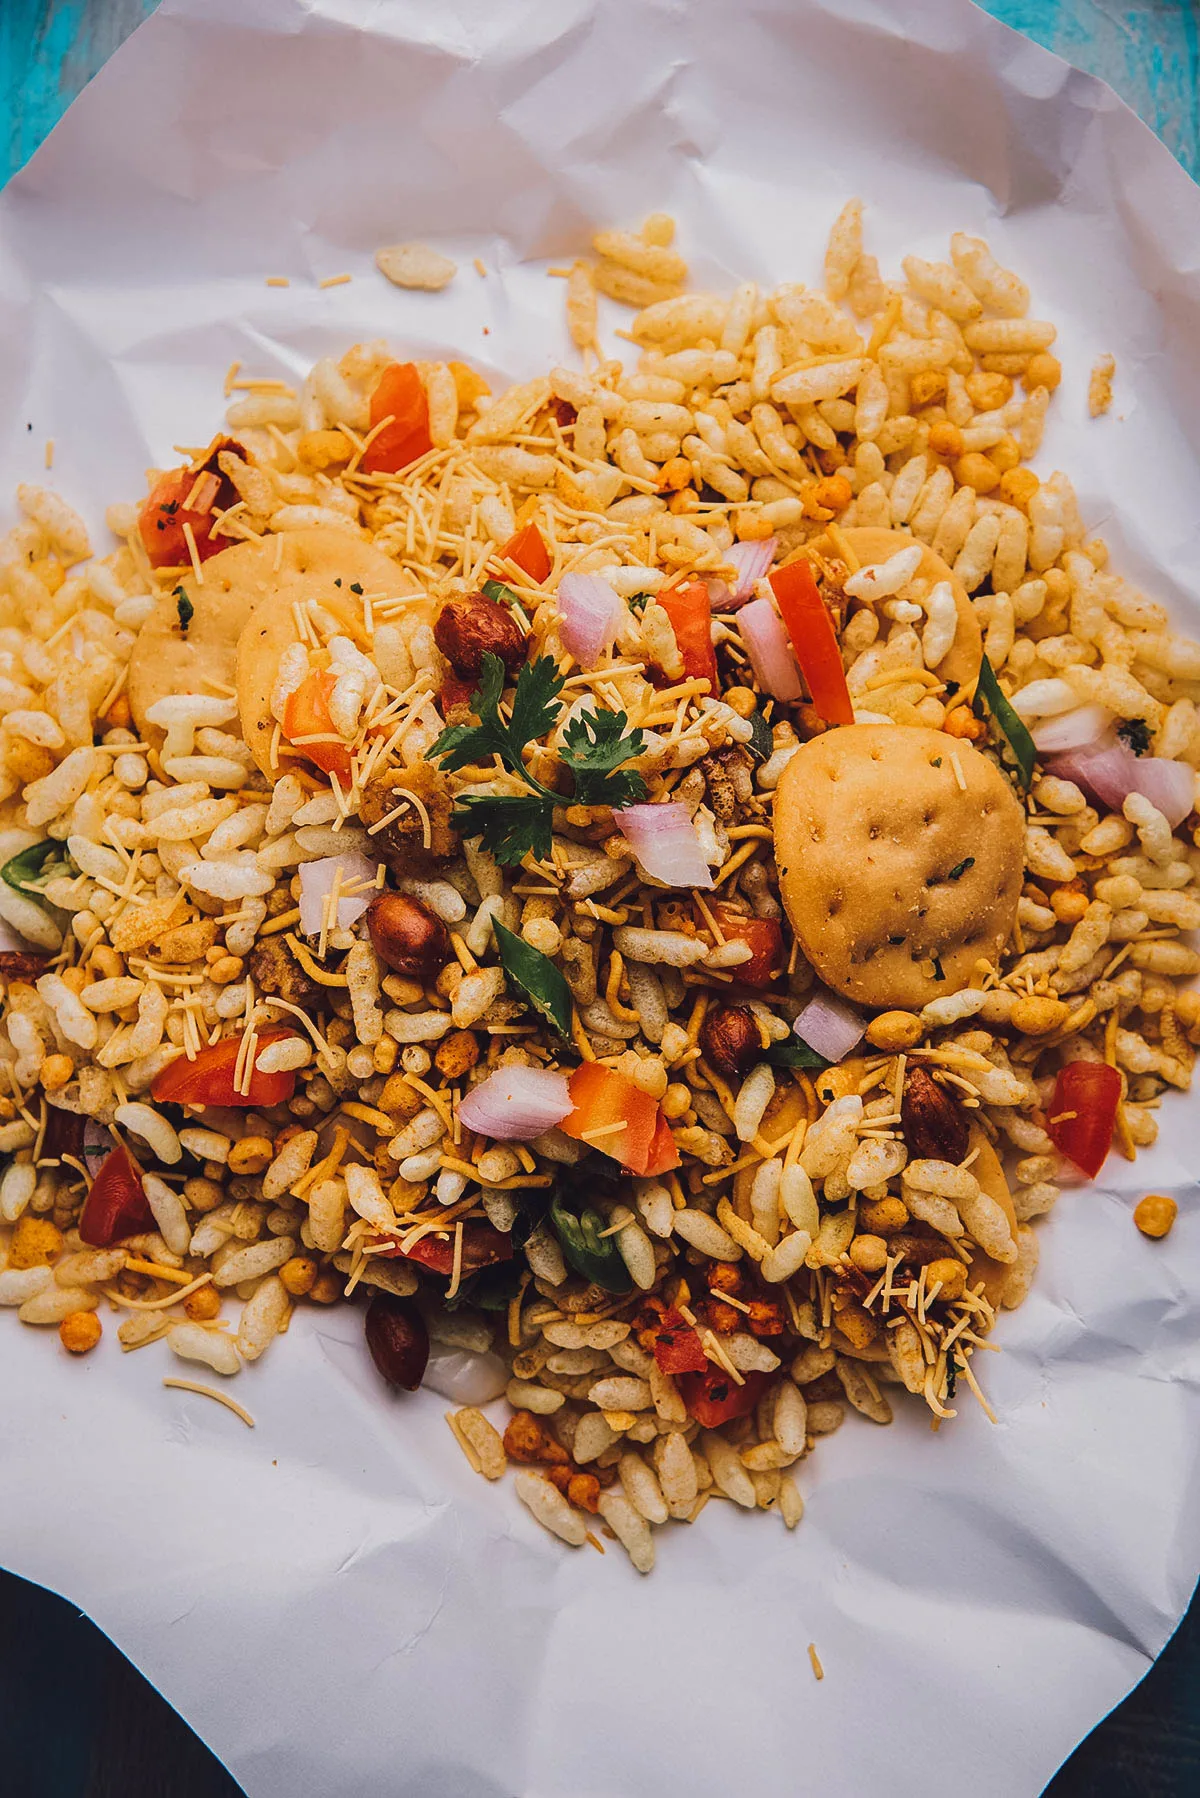 Bhel puri on paper, one of the most popular street foods in India